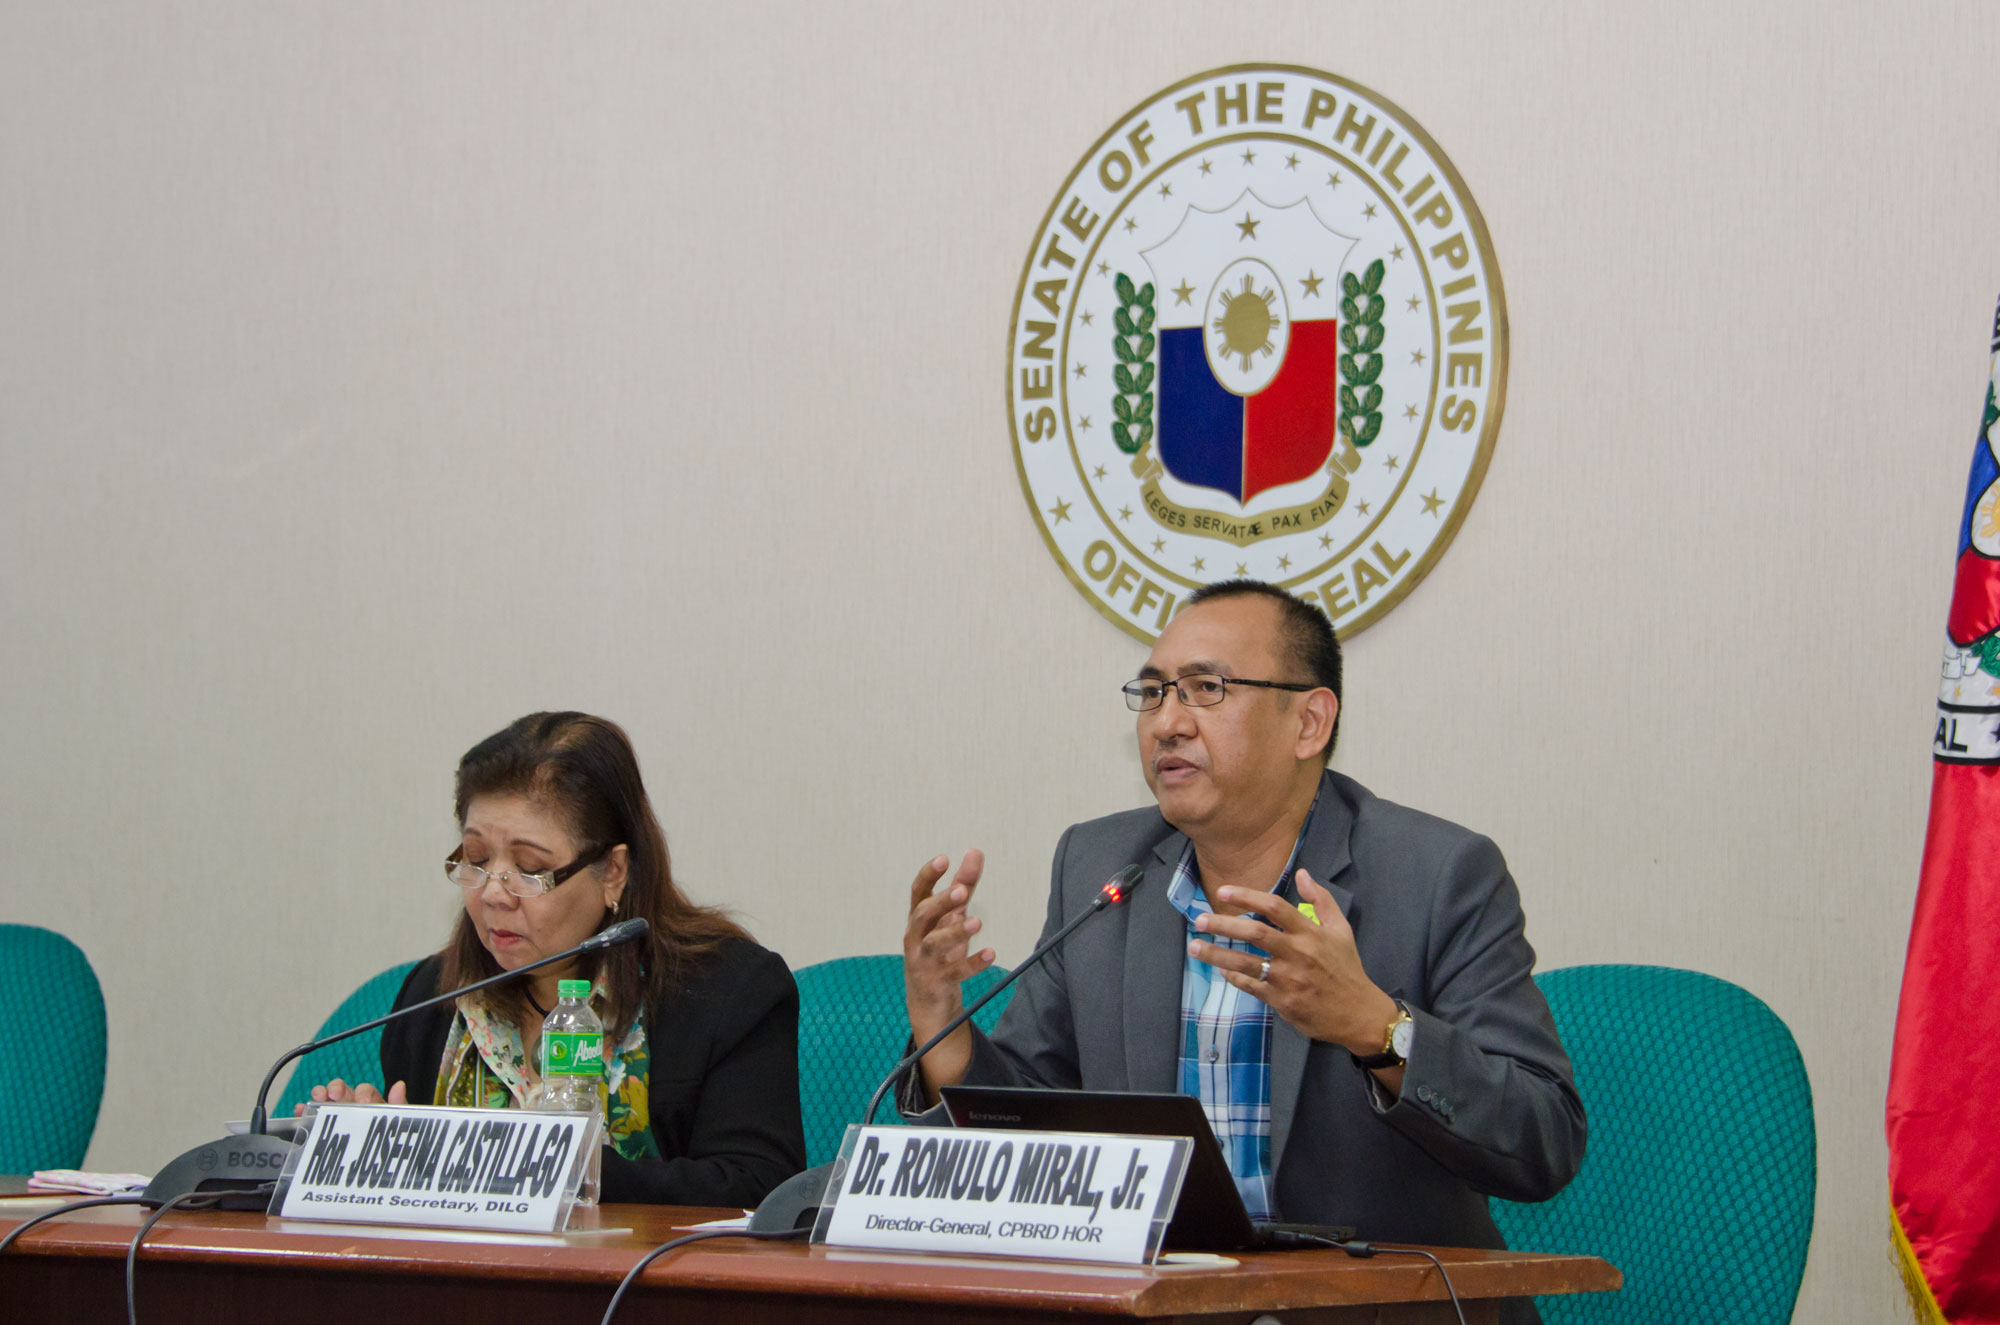 Senate Centennial Lecture Series “Assessment of the Bottom-up Budgeting Process for FY 2015-ggm_8082.jpg